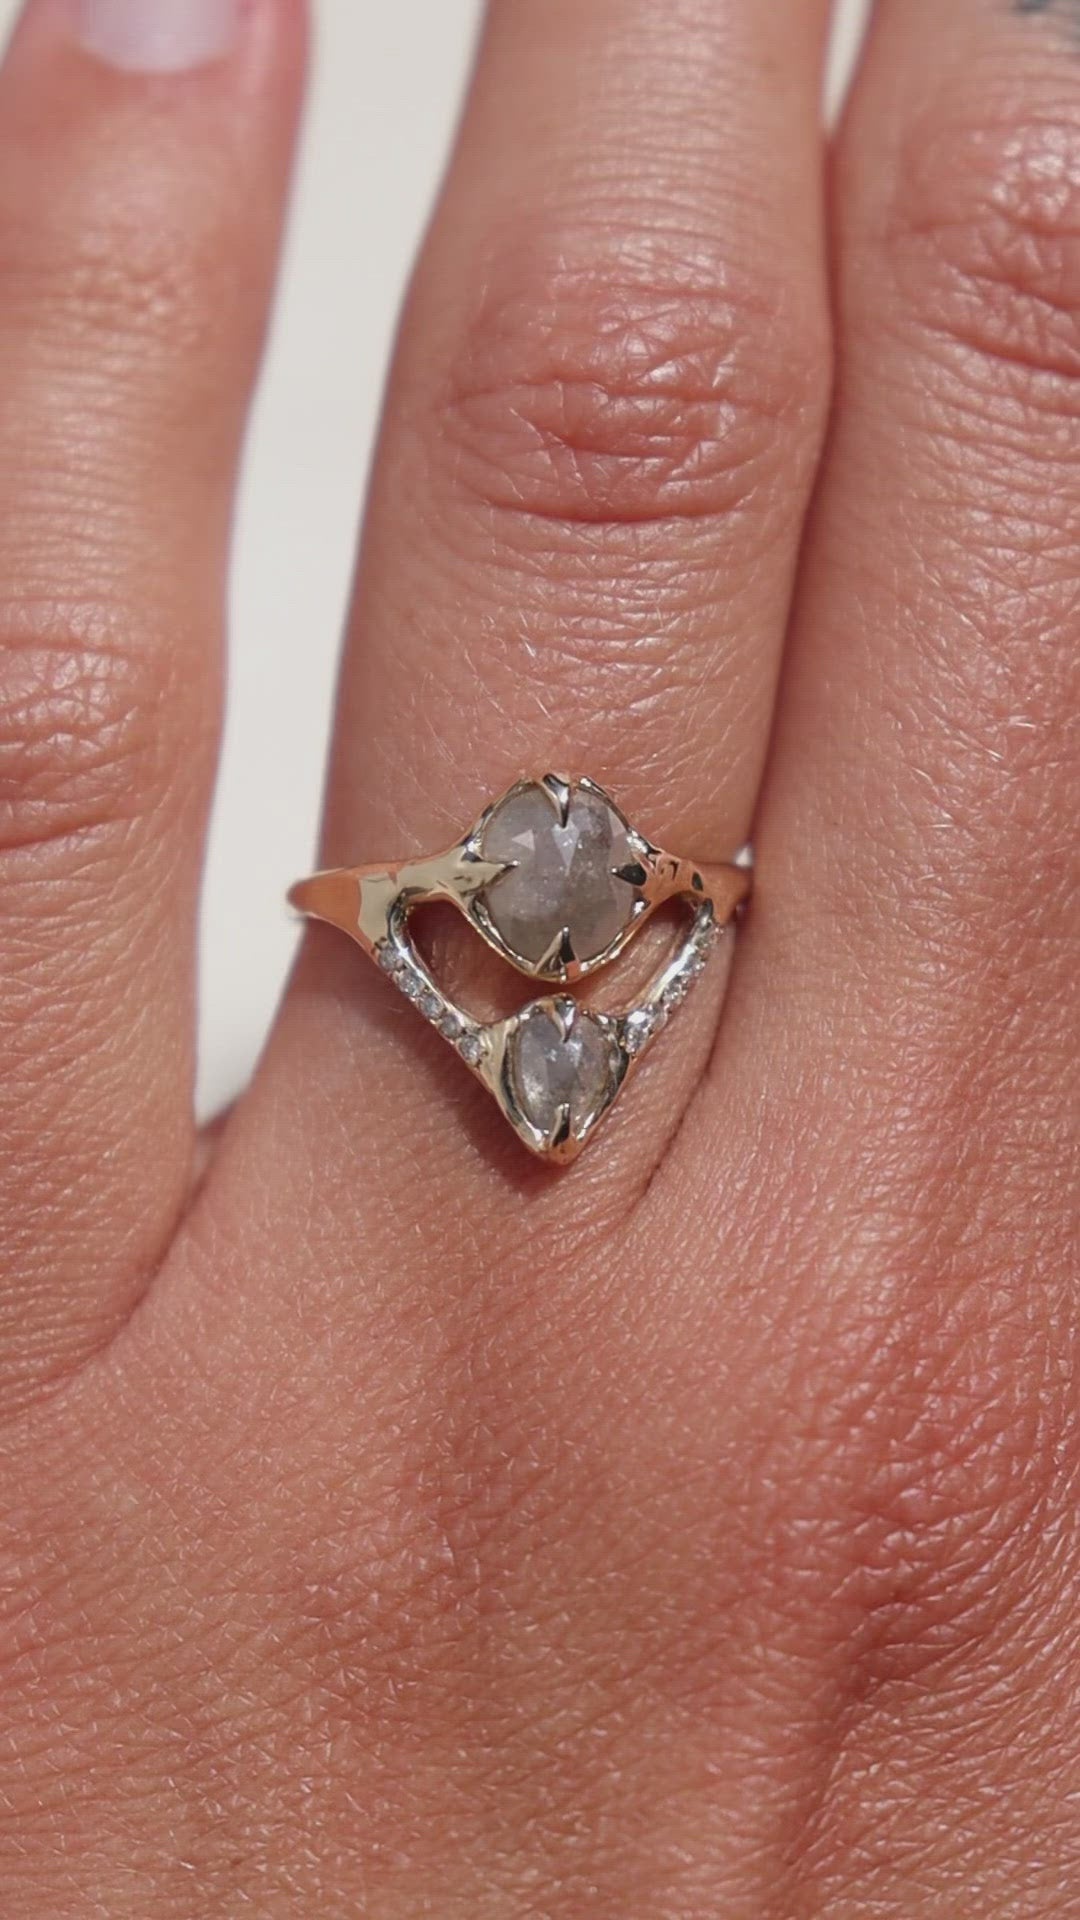 video close up of a gold rustic diamond ring, there are two gray diamonds prong set and a v-shaped row of pave diamonds